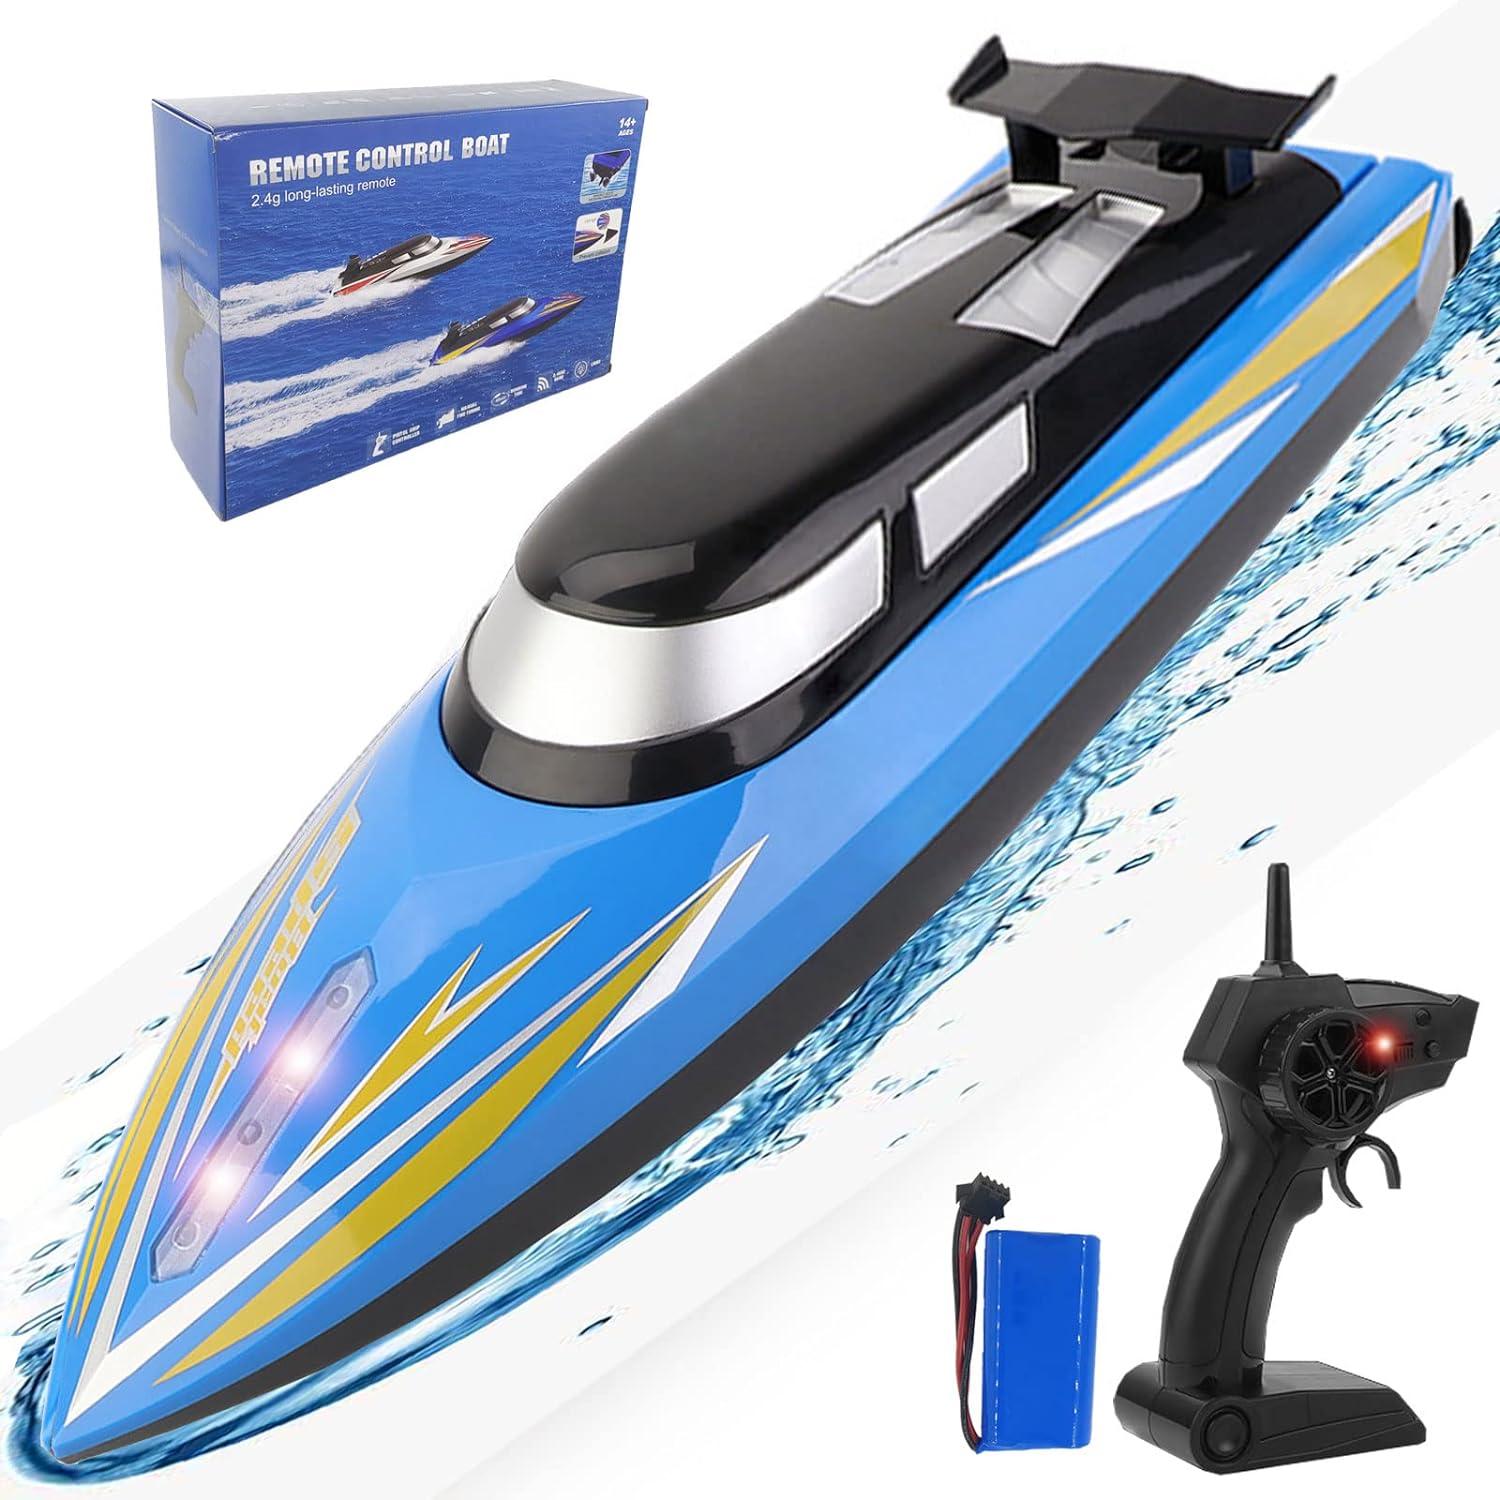 Speed Boat Toy Remote Control: Benefits of a Speed Boat Toy Remote Control